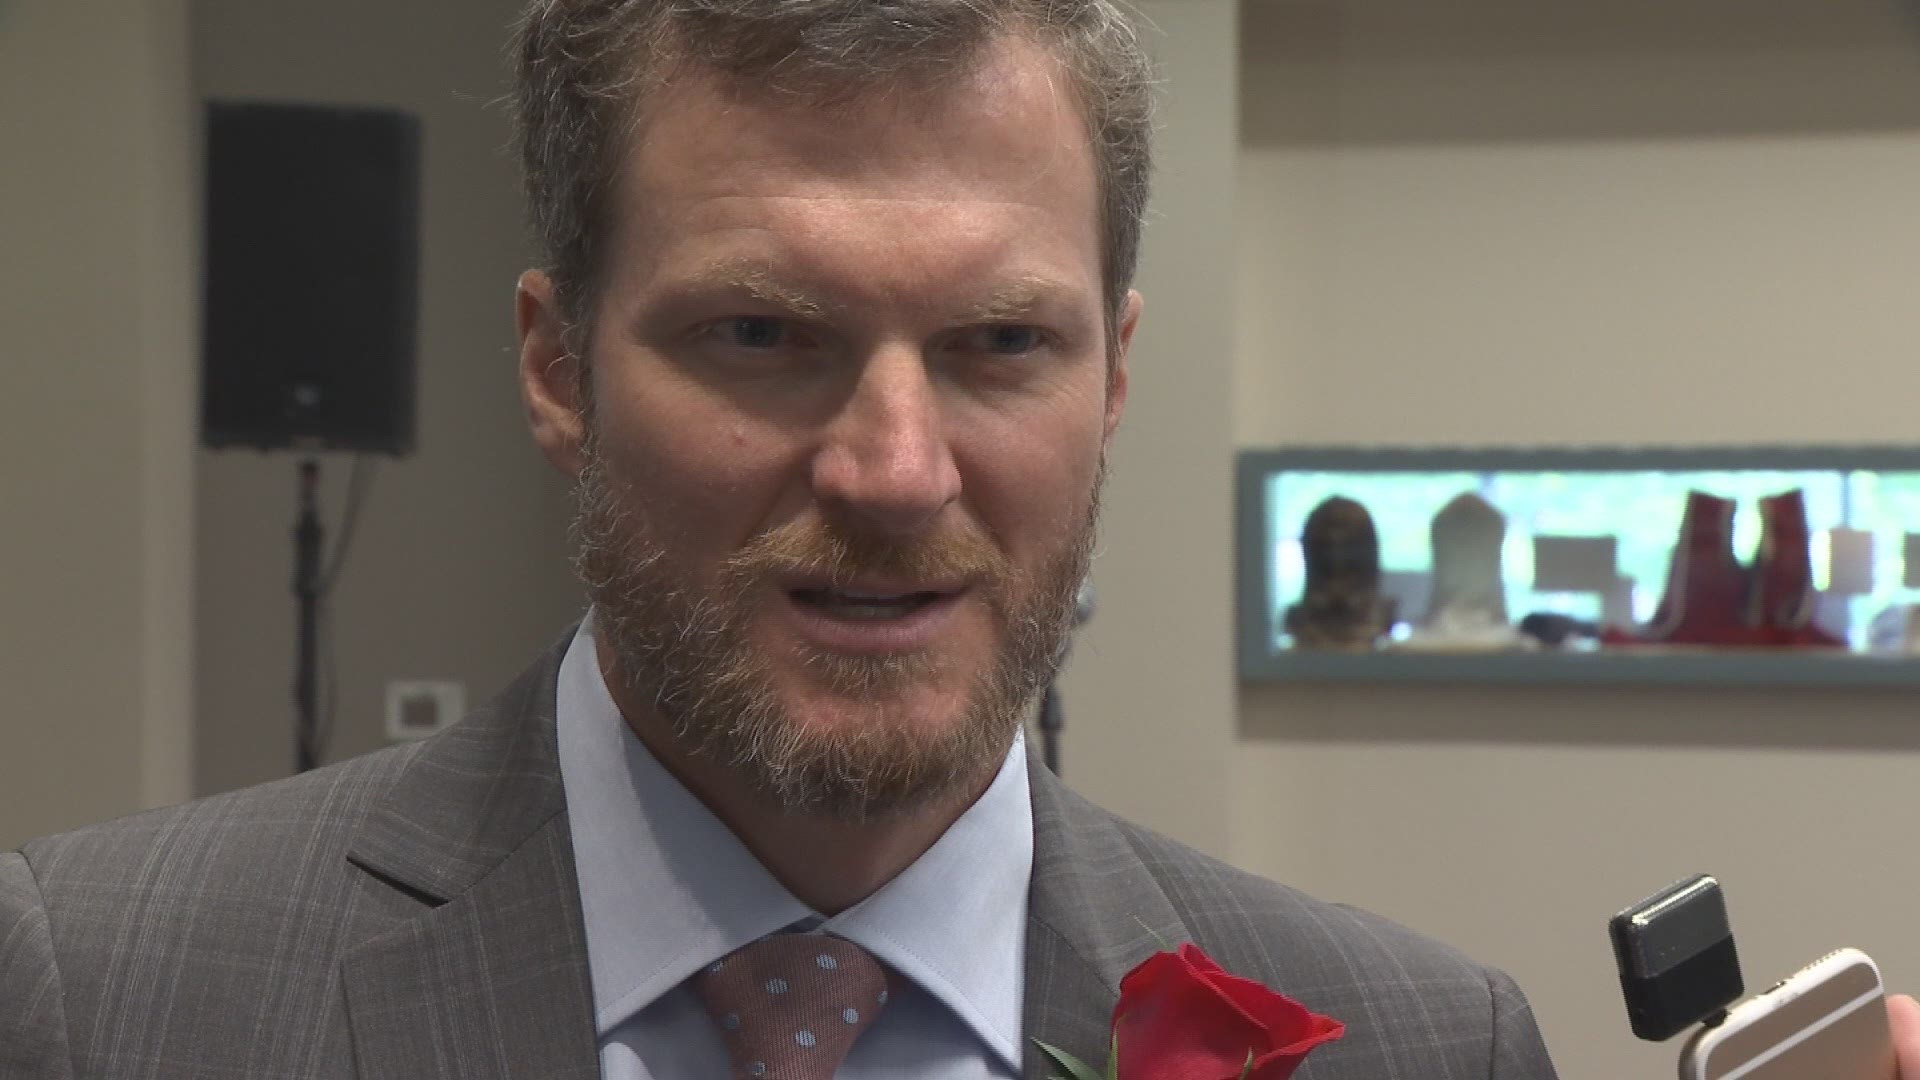 Former NASCAR driver Dale Earnhardt Jr. was one of 12 sports legends inducted into the 2019 North Carolina Sports Hall of Fame Friday in Raleigh.